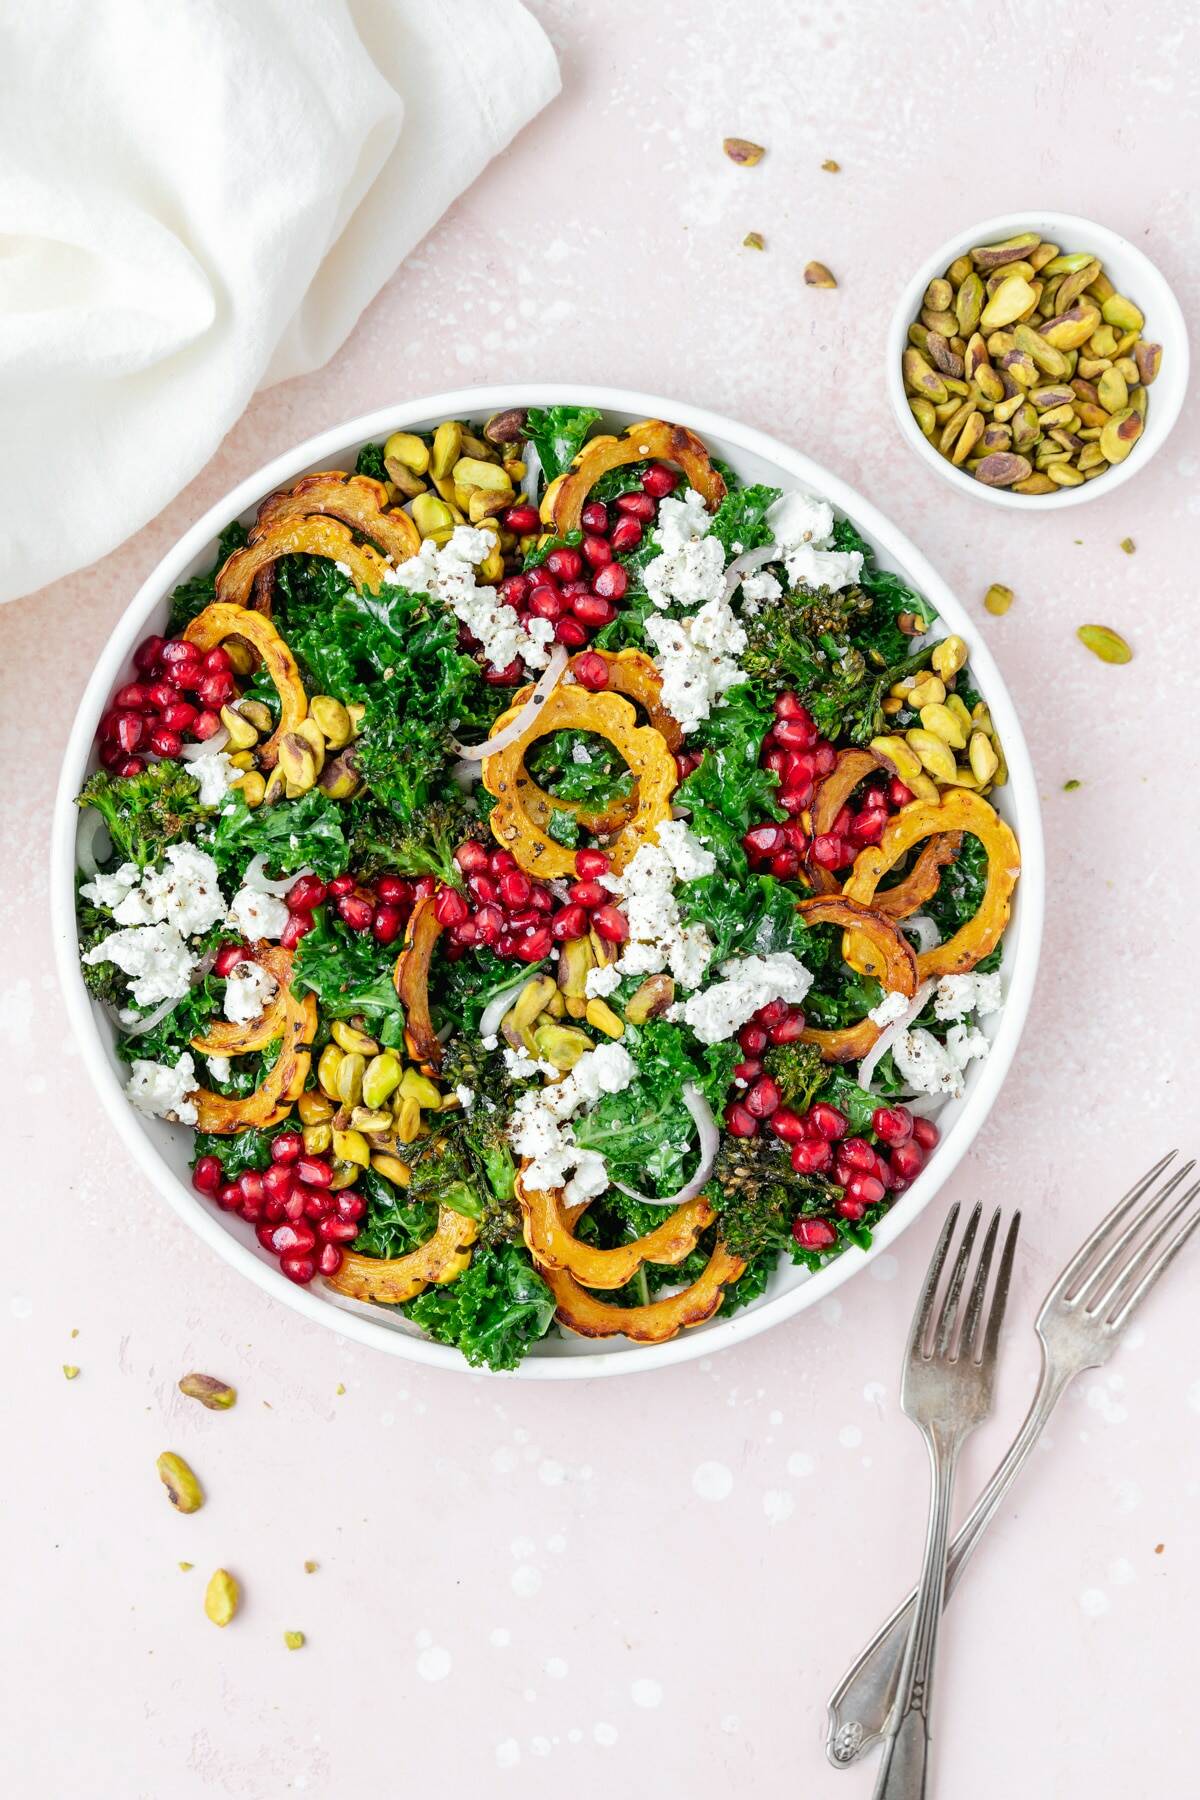 A white bowl filled with leafy green kale, slices of orange squash, pistachios, pomegranate seeds and chunks of goat cheese. A bowl of pistachios sits above the salad with a set of forks and a white napkin on each side of the bowl.